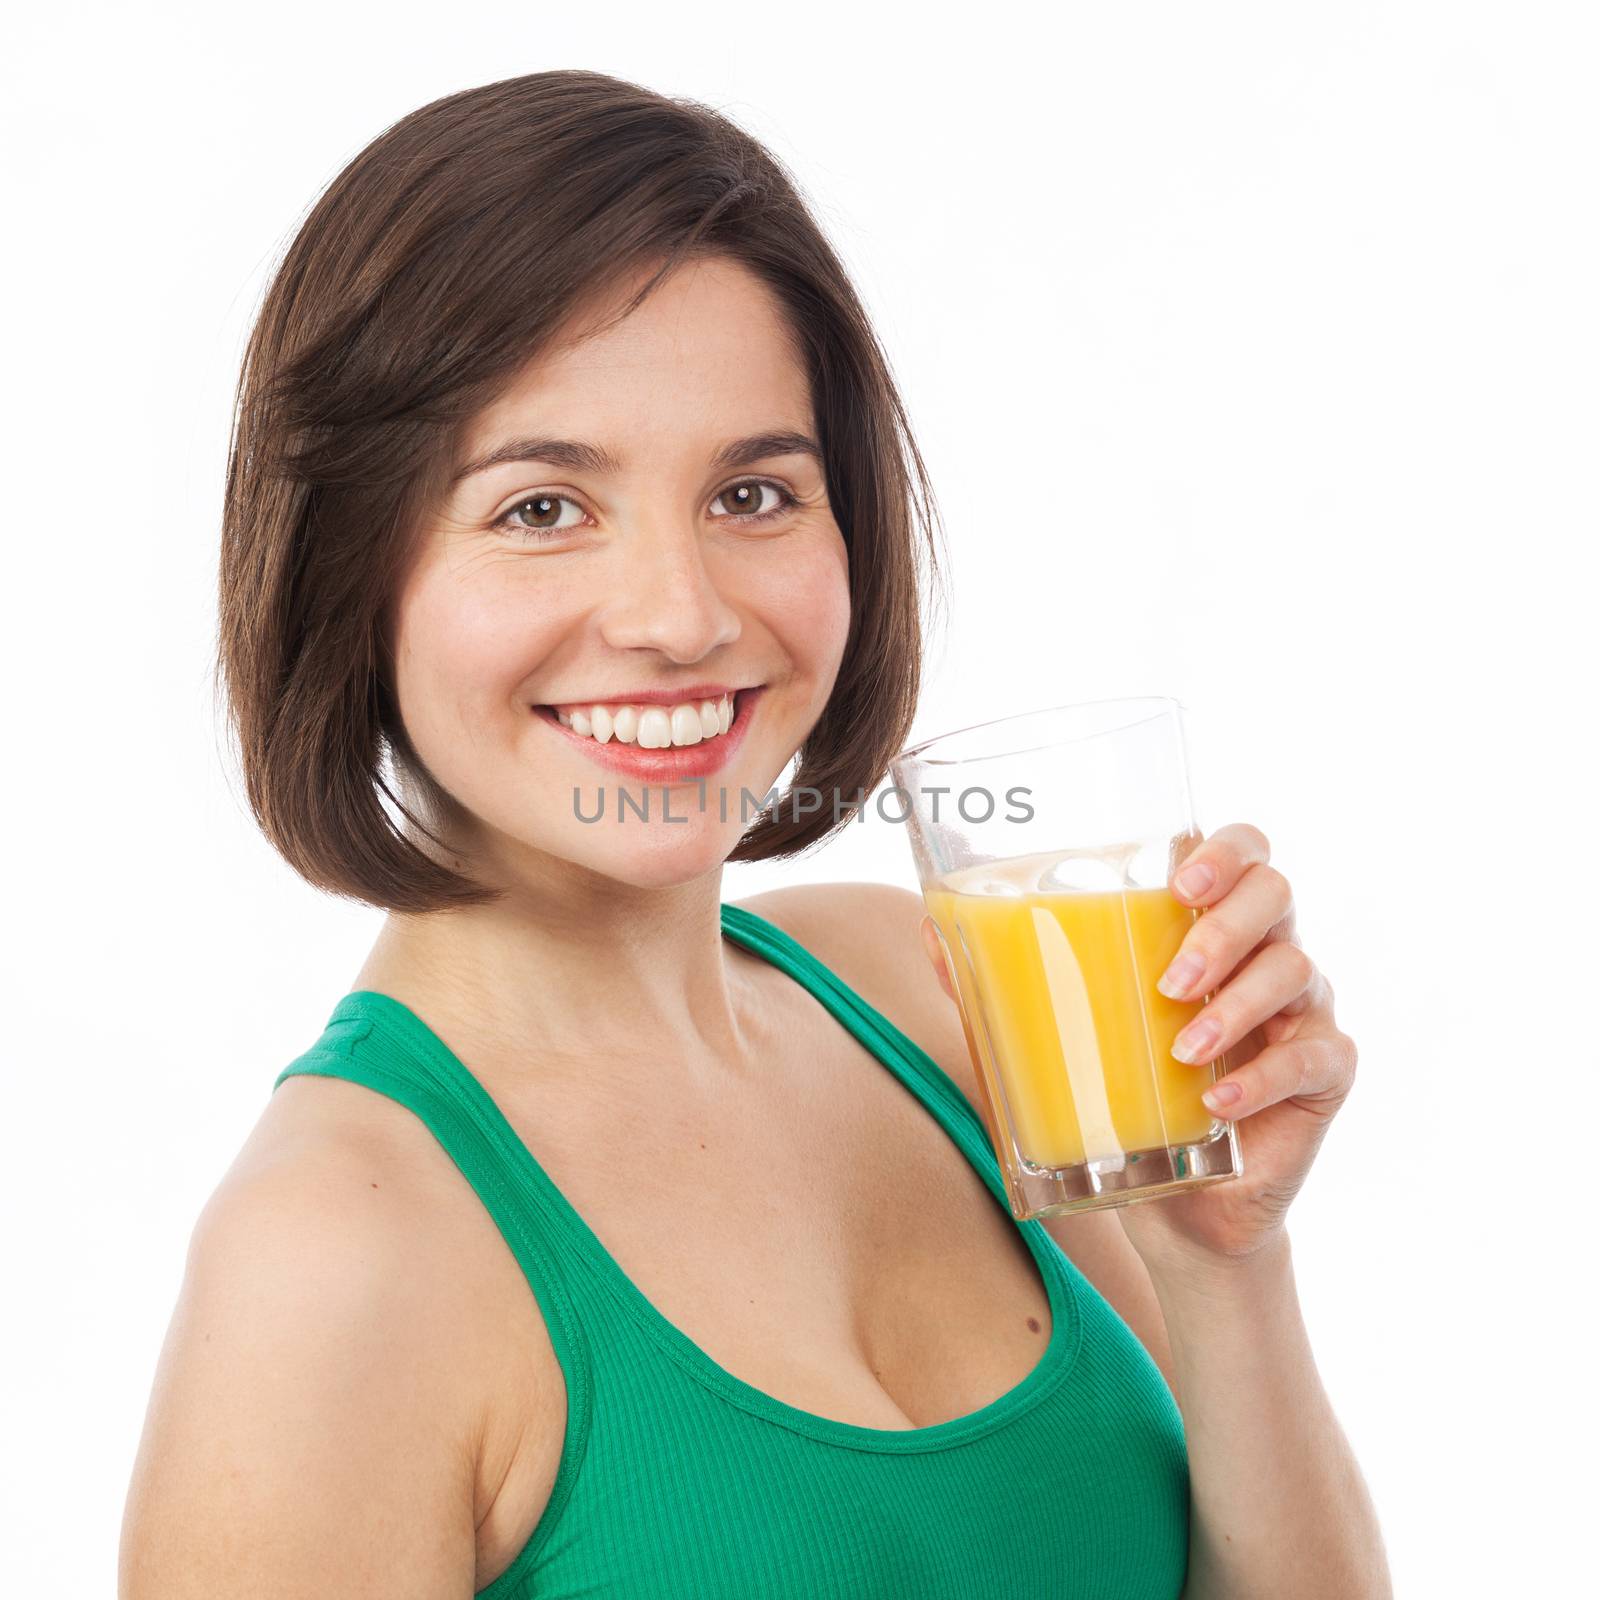 Smiling young woman drinking an orange juice by TristanBM